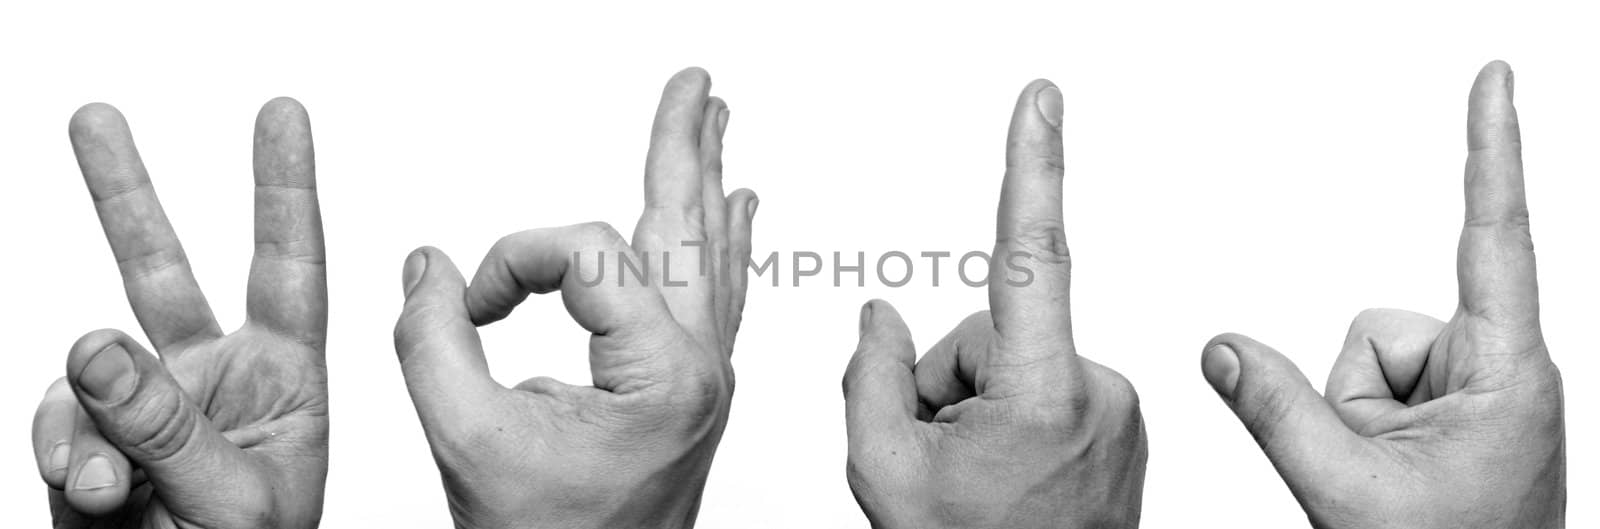 Human hands showing 2011 over white background